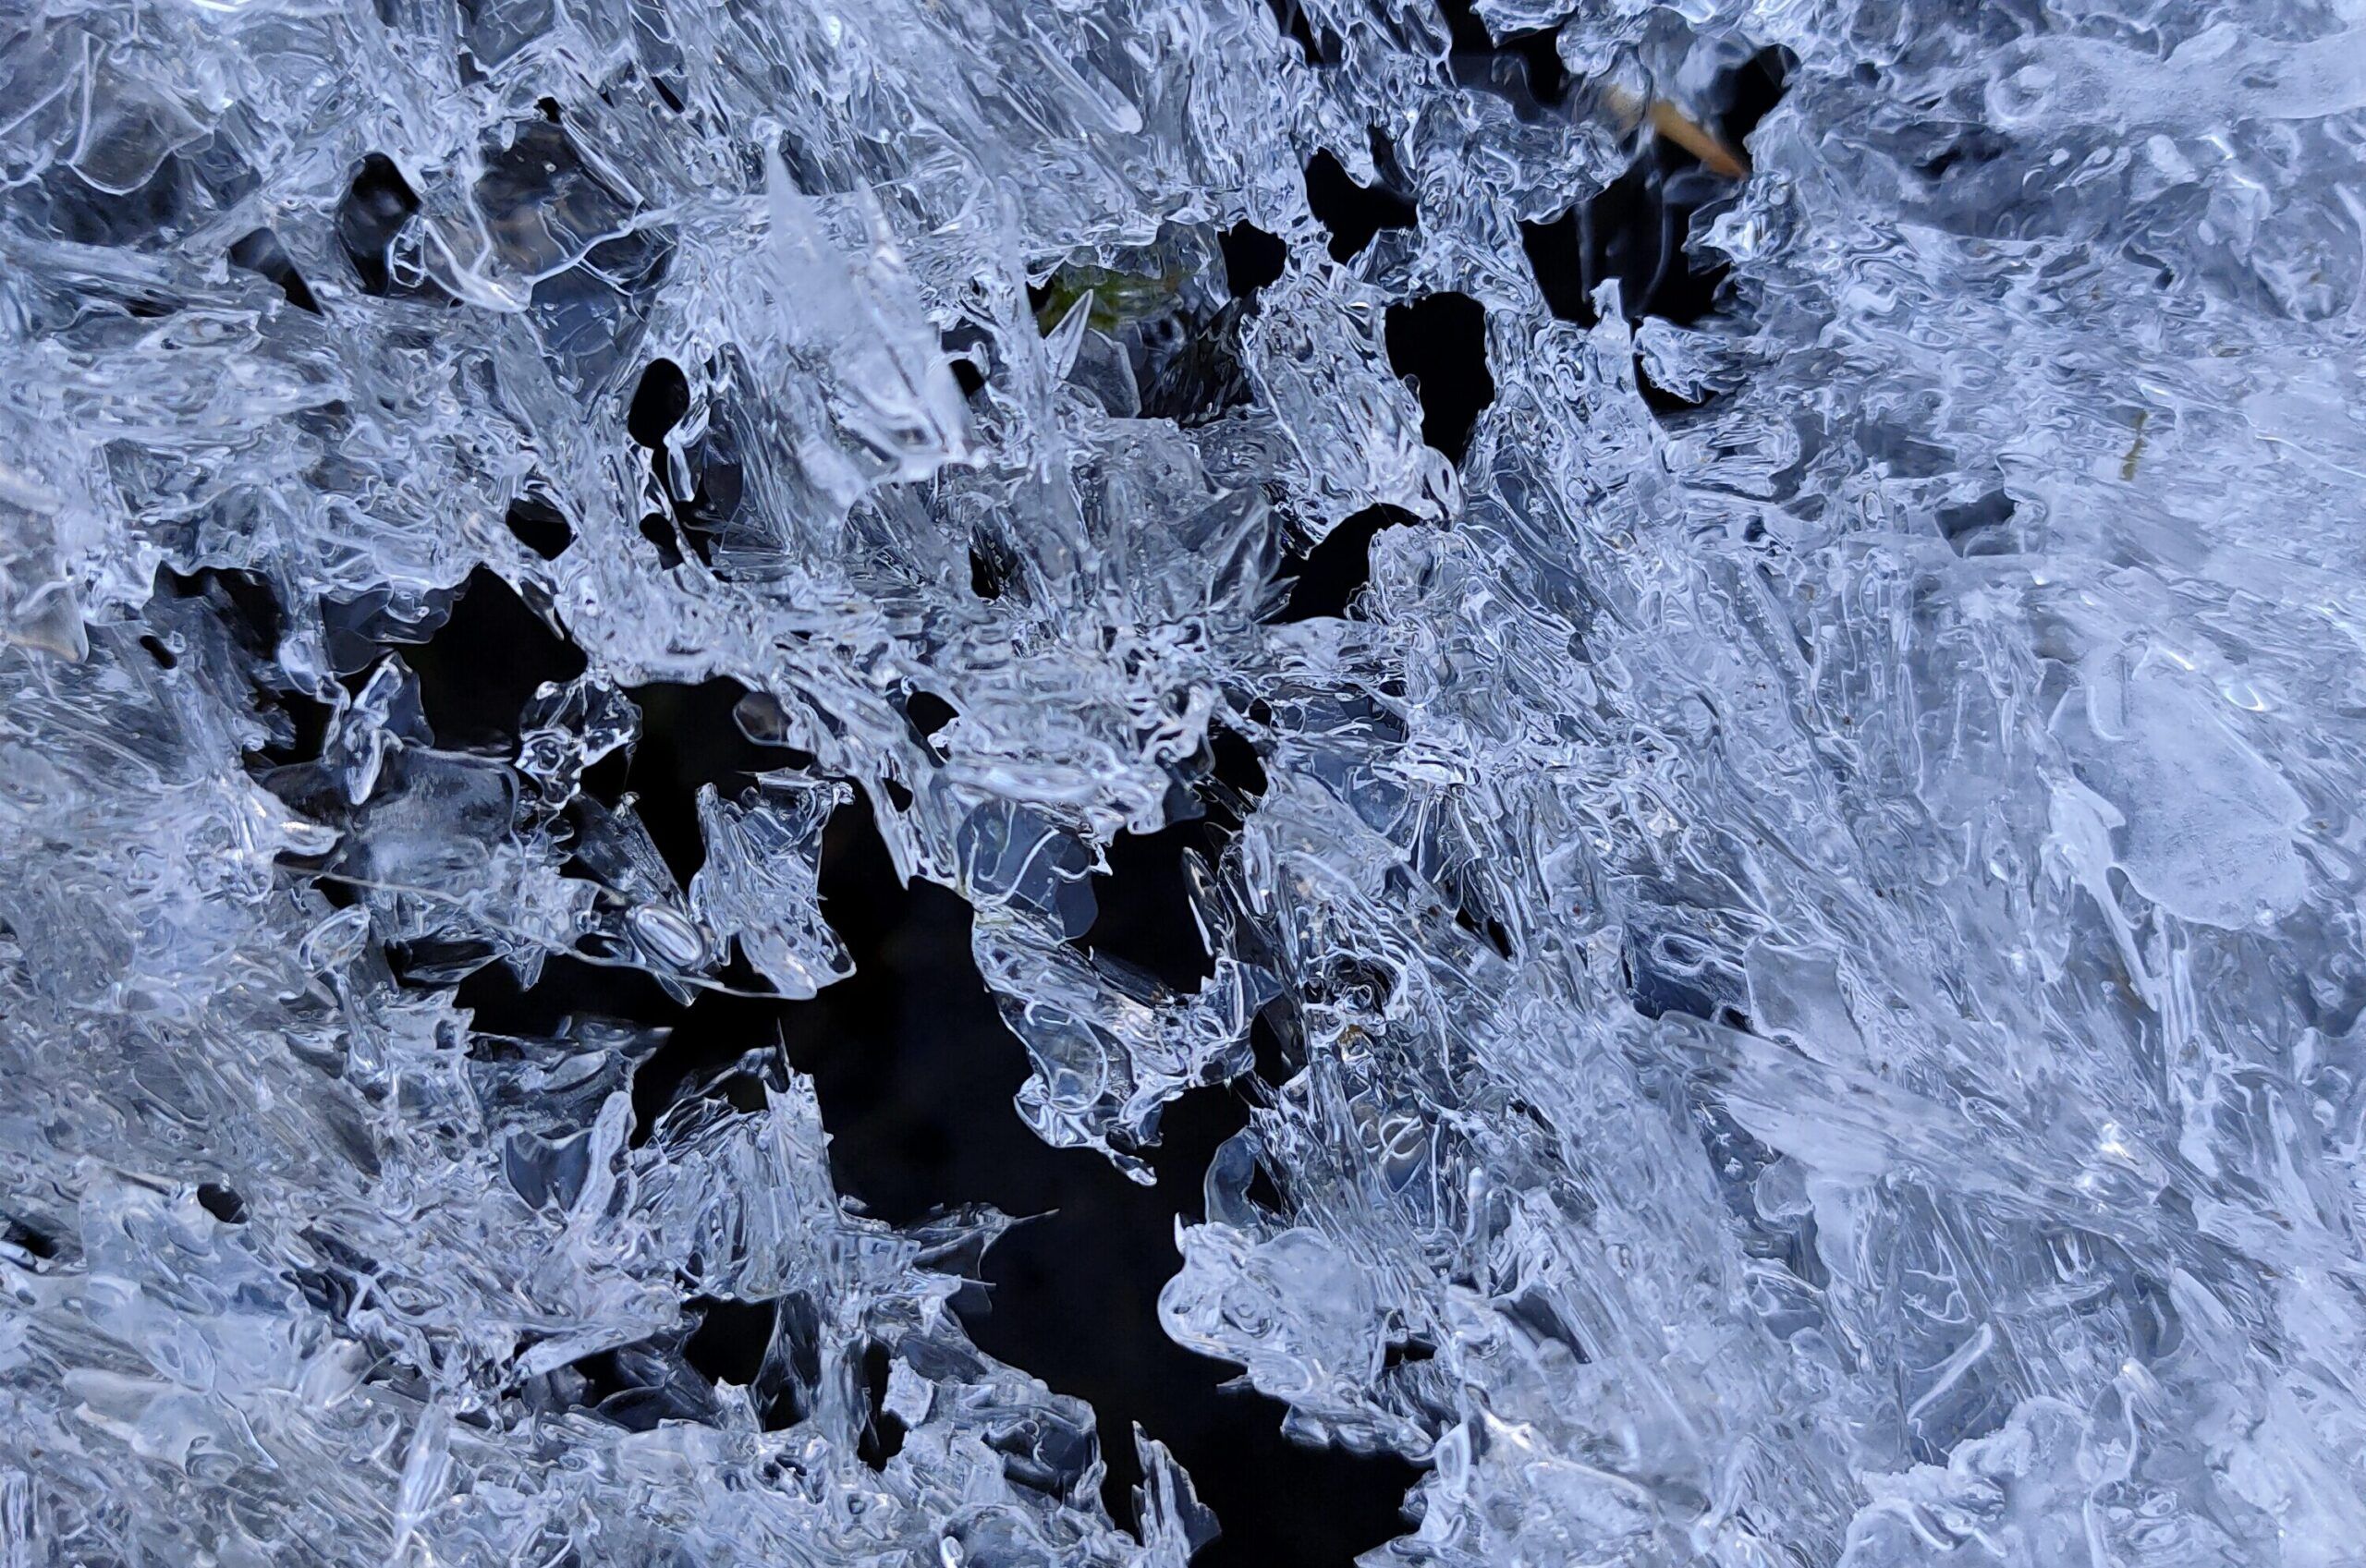 ice-crystals-scaled-aspect-ratio-540-358